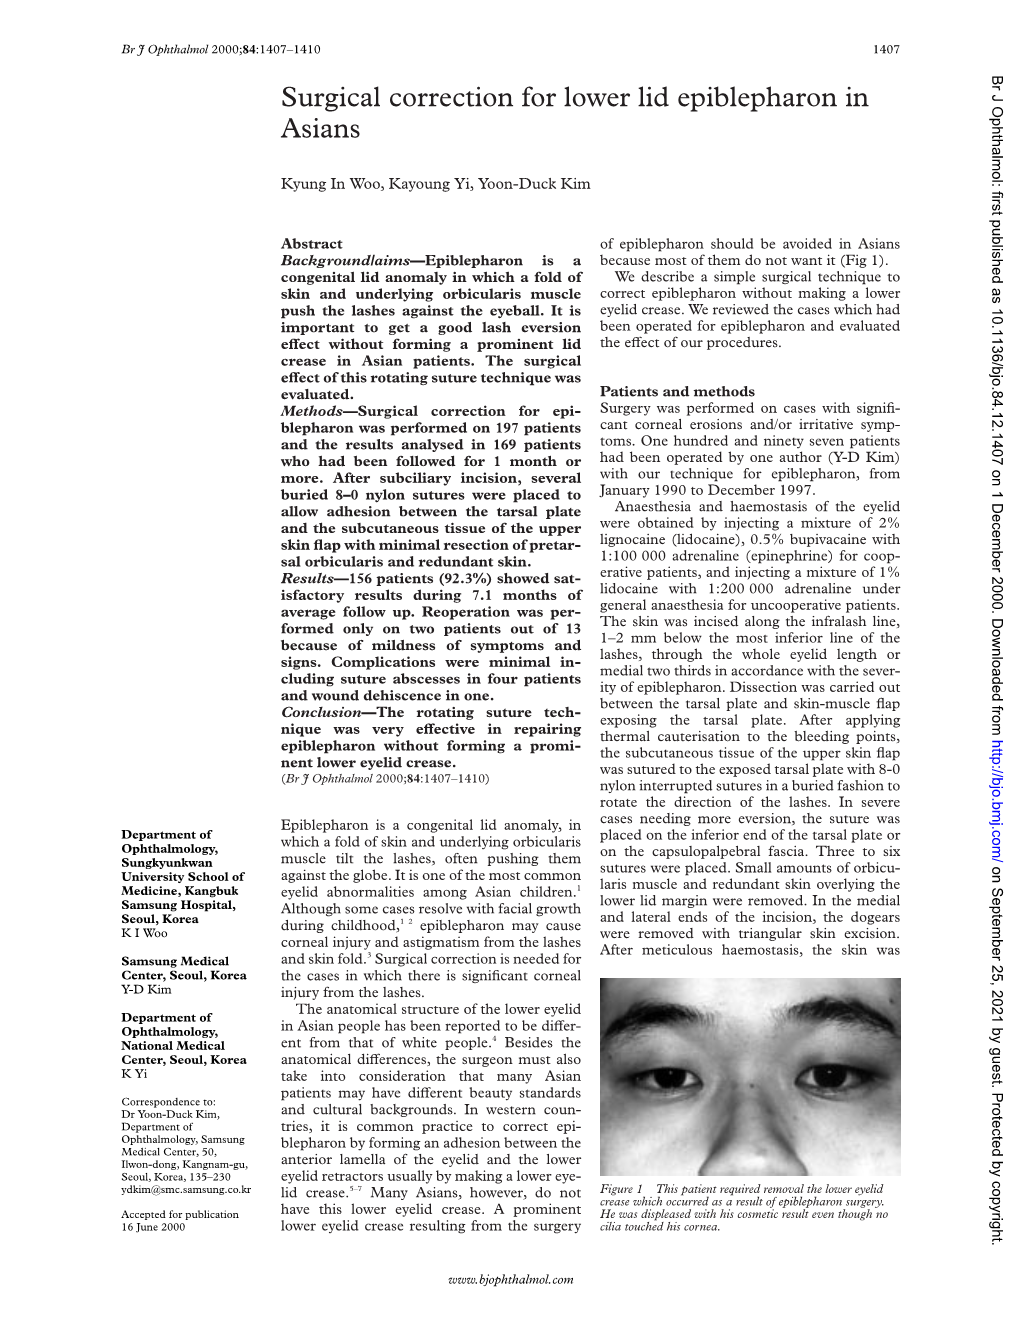 Surgical Correction for Lower Lid Epiblepharon in Asians